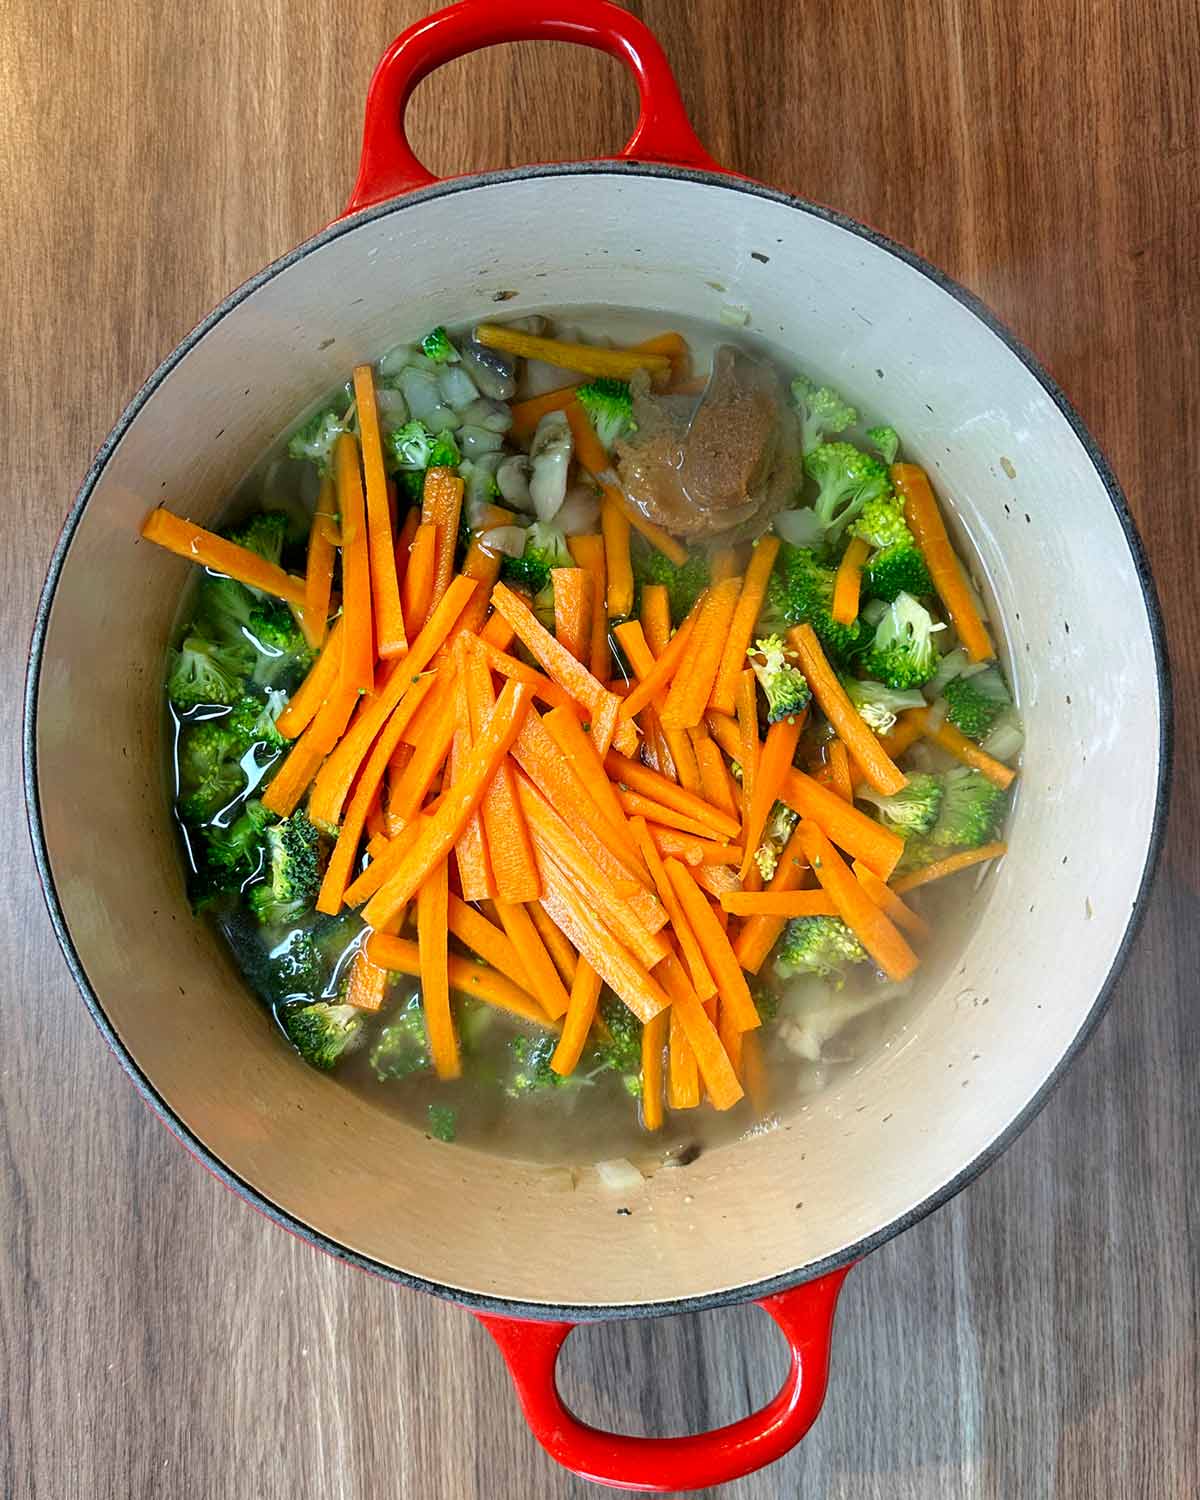 Carrots, broccoli and miso paste added to the pan.